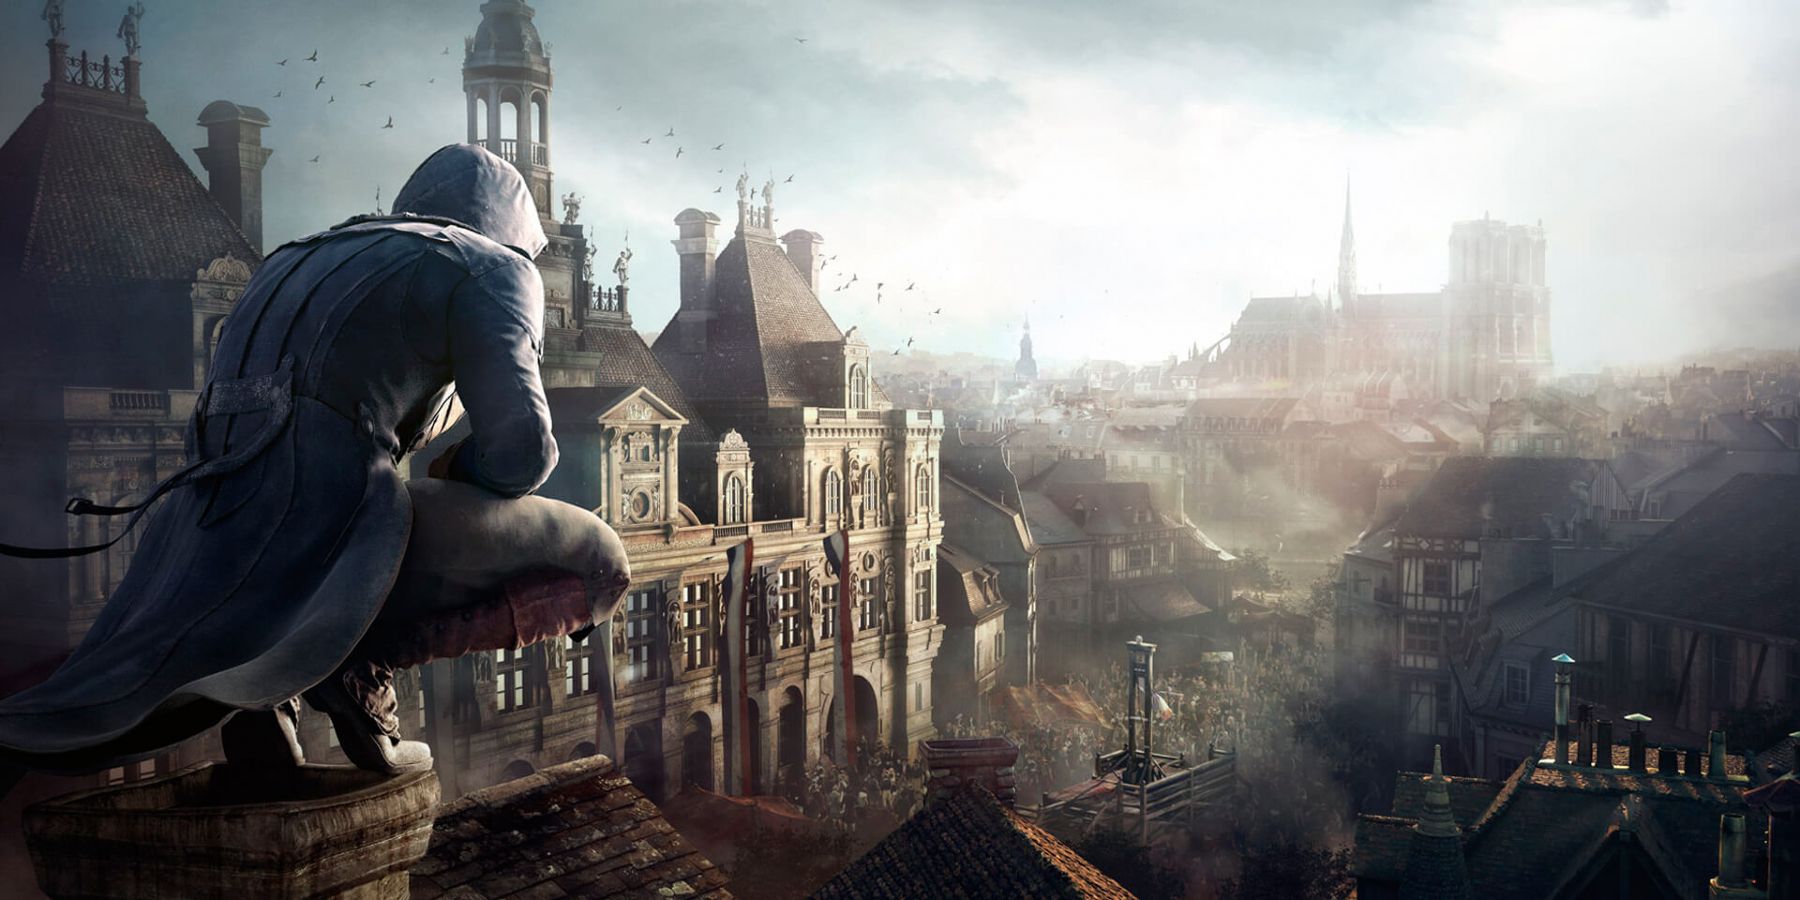 Arno looks out over the Paris skyline in Assassin's Creed Unity 